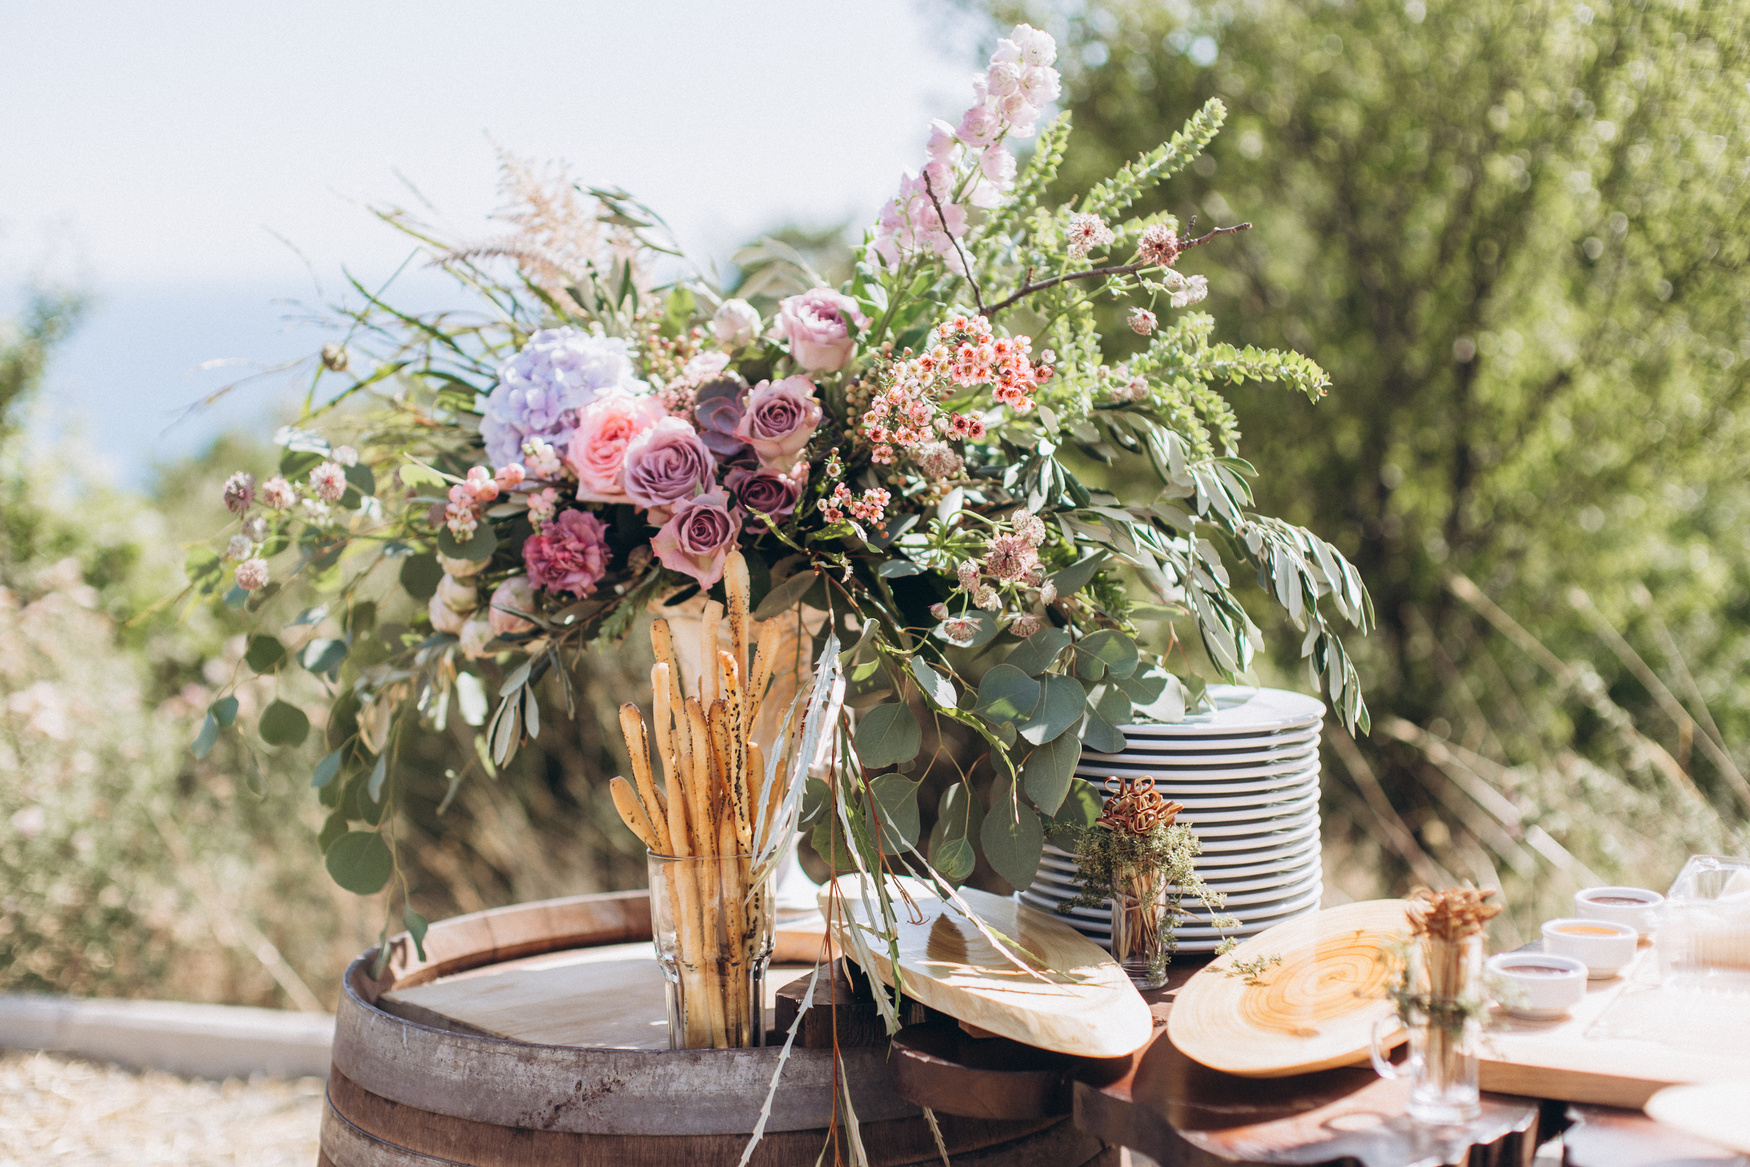 Boho wedding table with eco decor for guests.